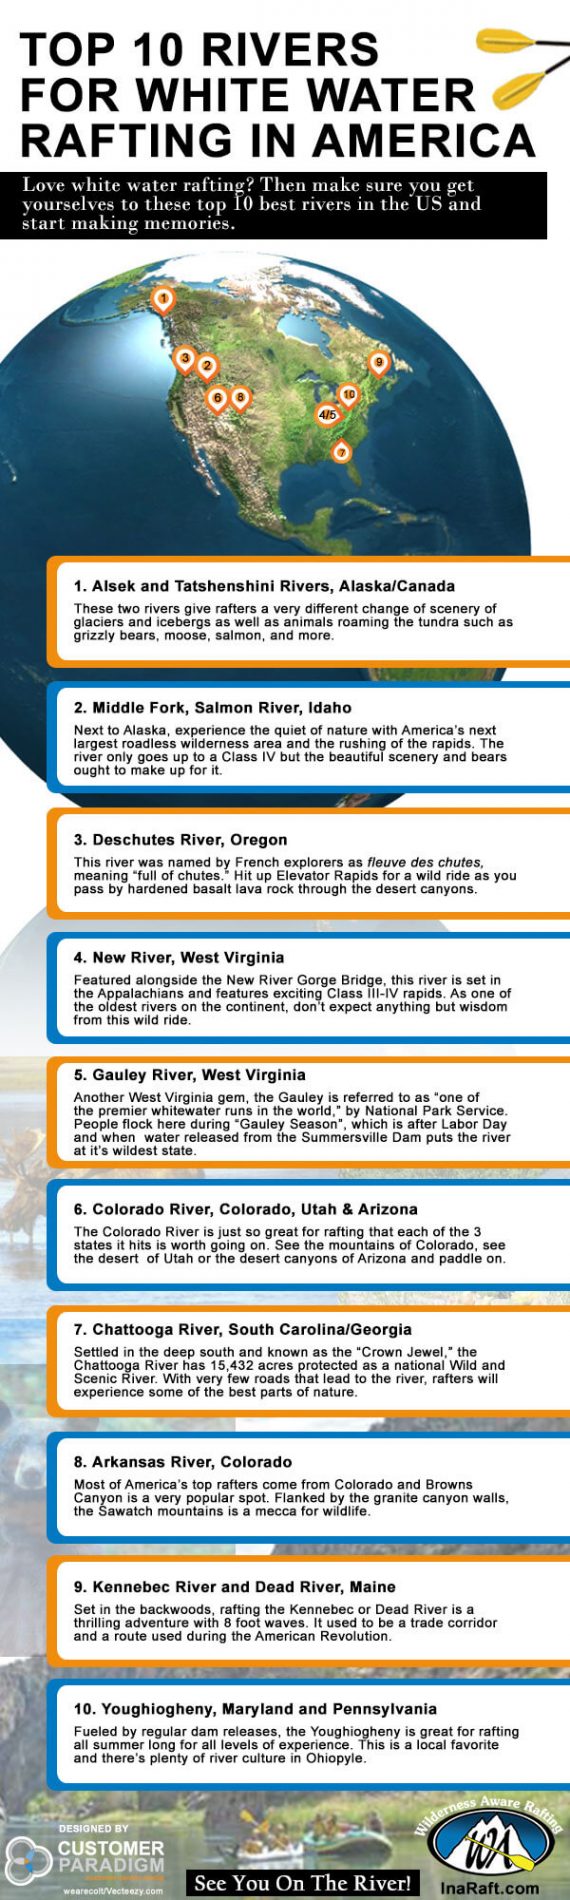 Top 10 Rivers for White Water Rafting in America Infographic - Wilderness Aware Rafting